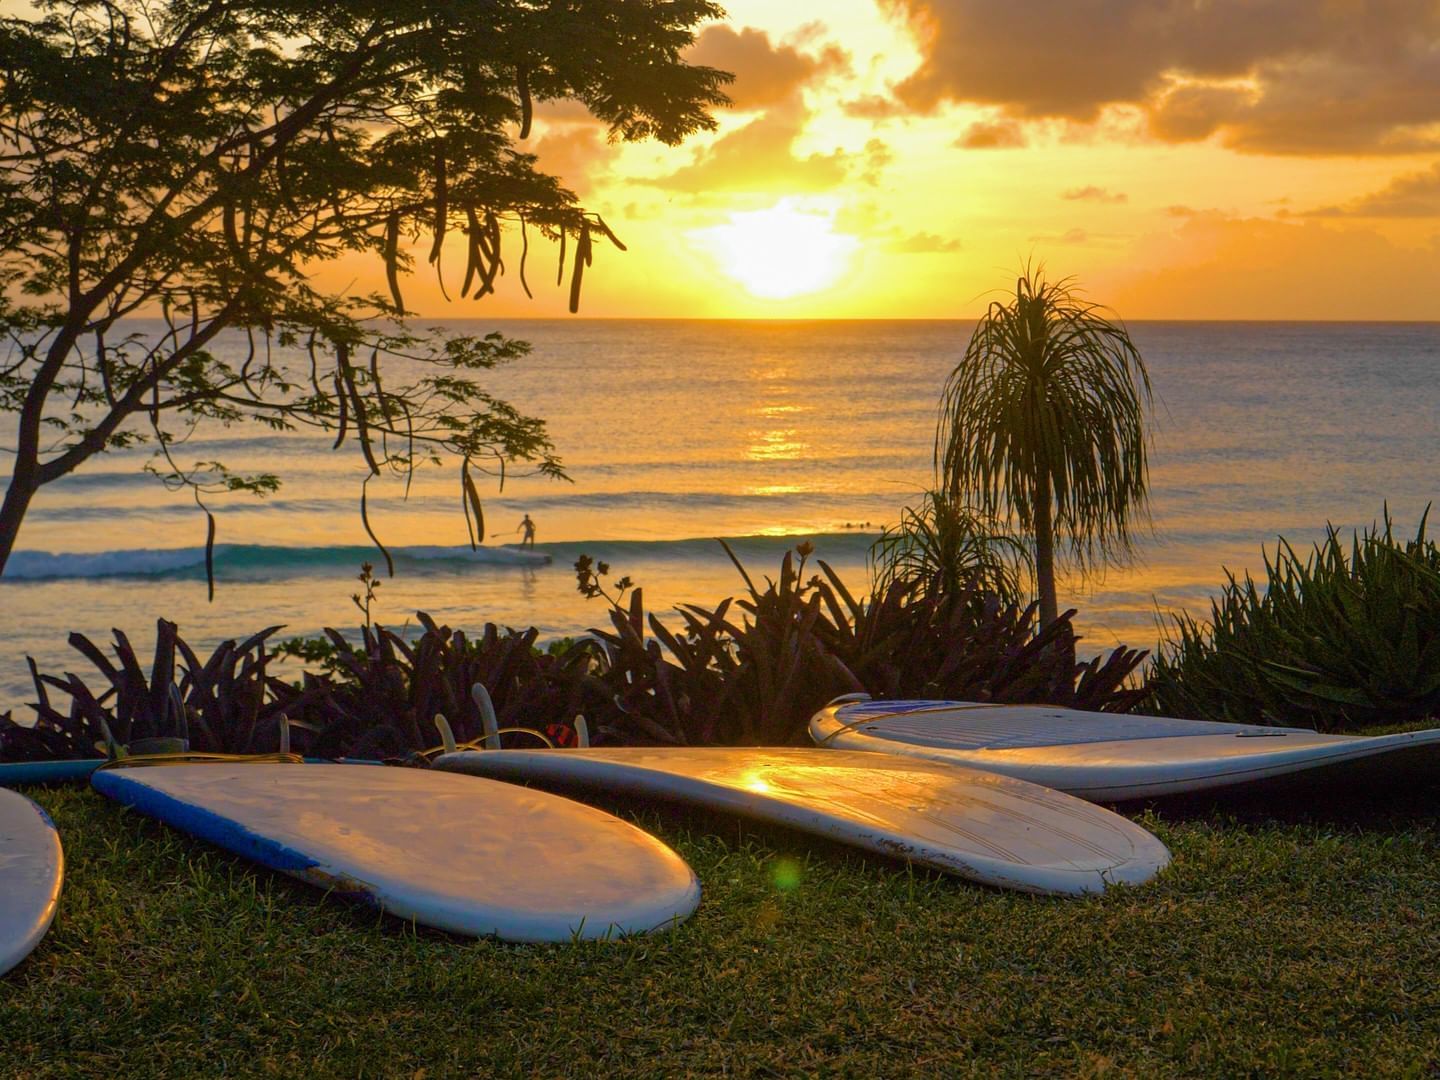 Beach with surf boards on the grass near Southern Palms Club